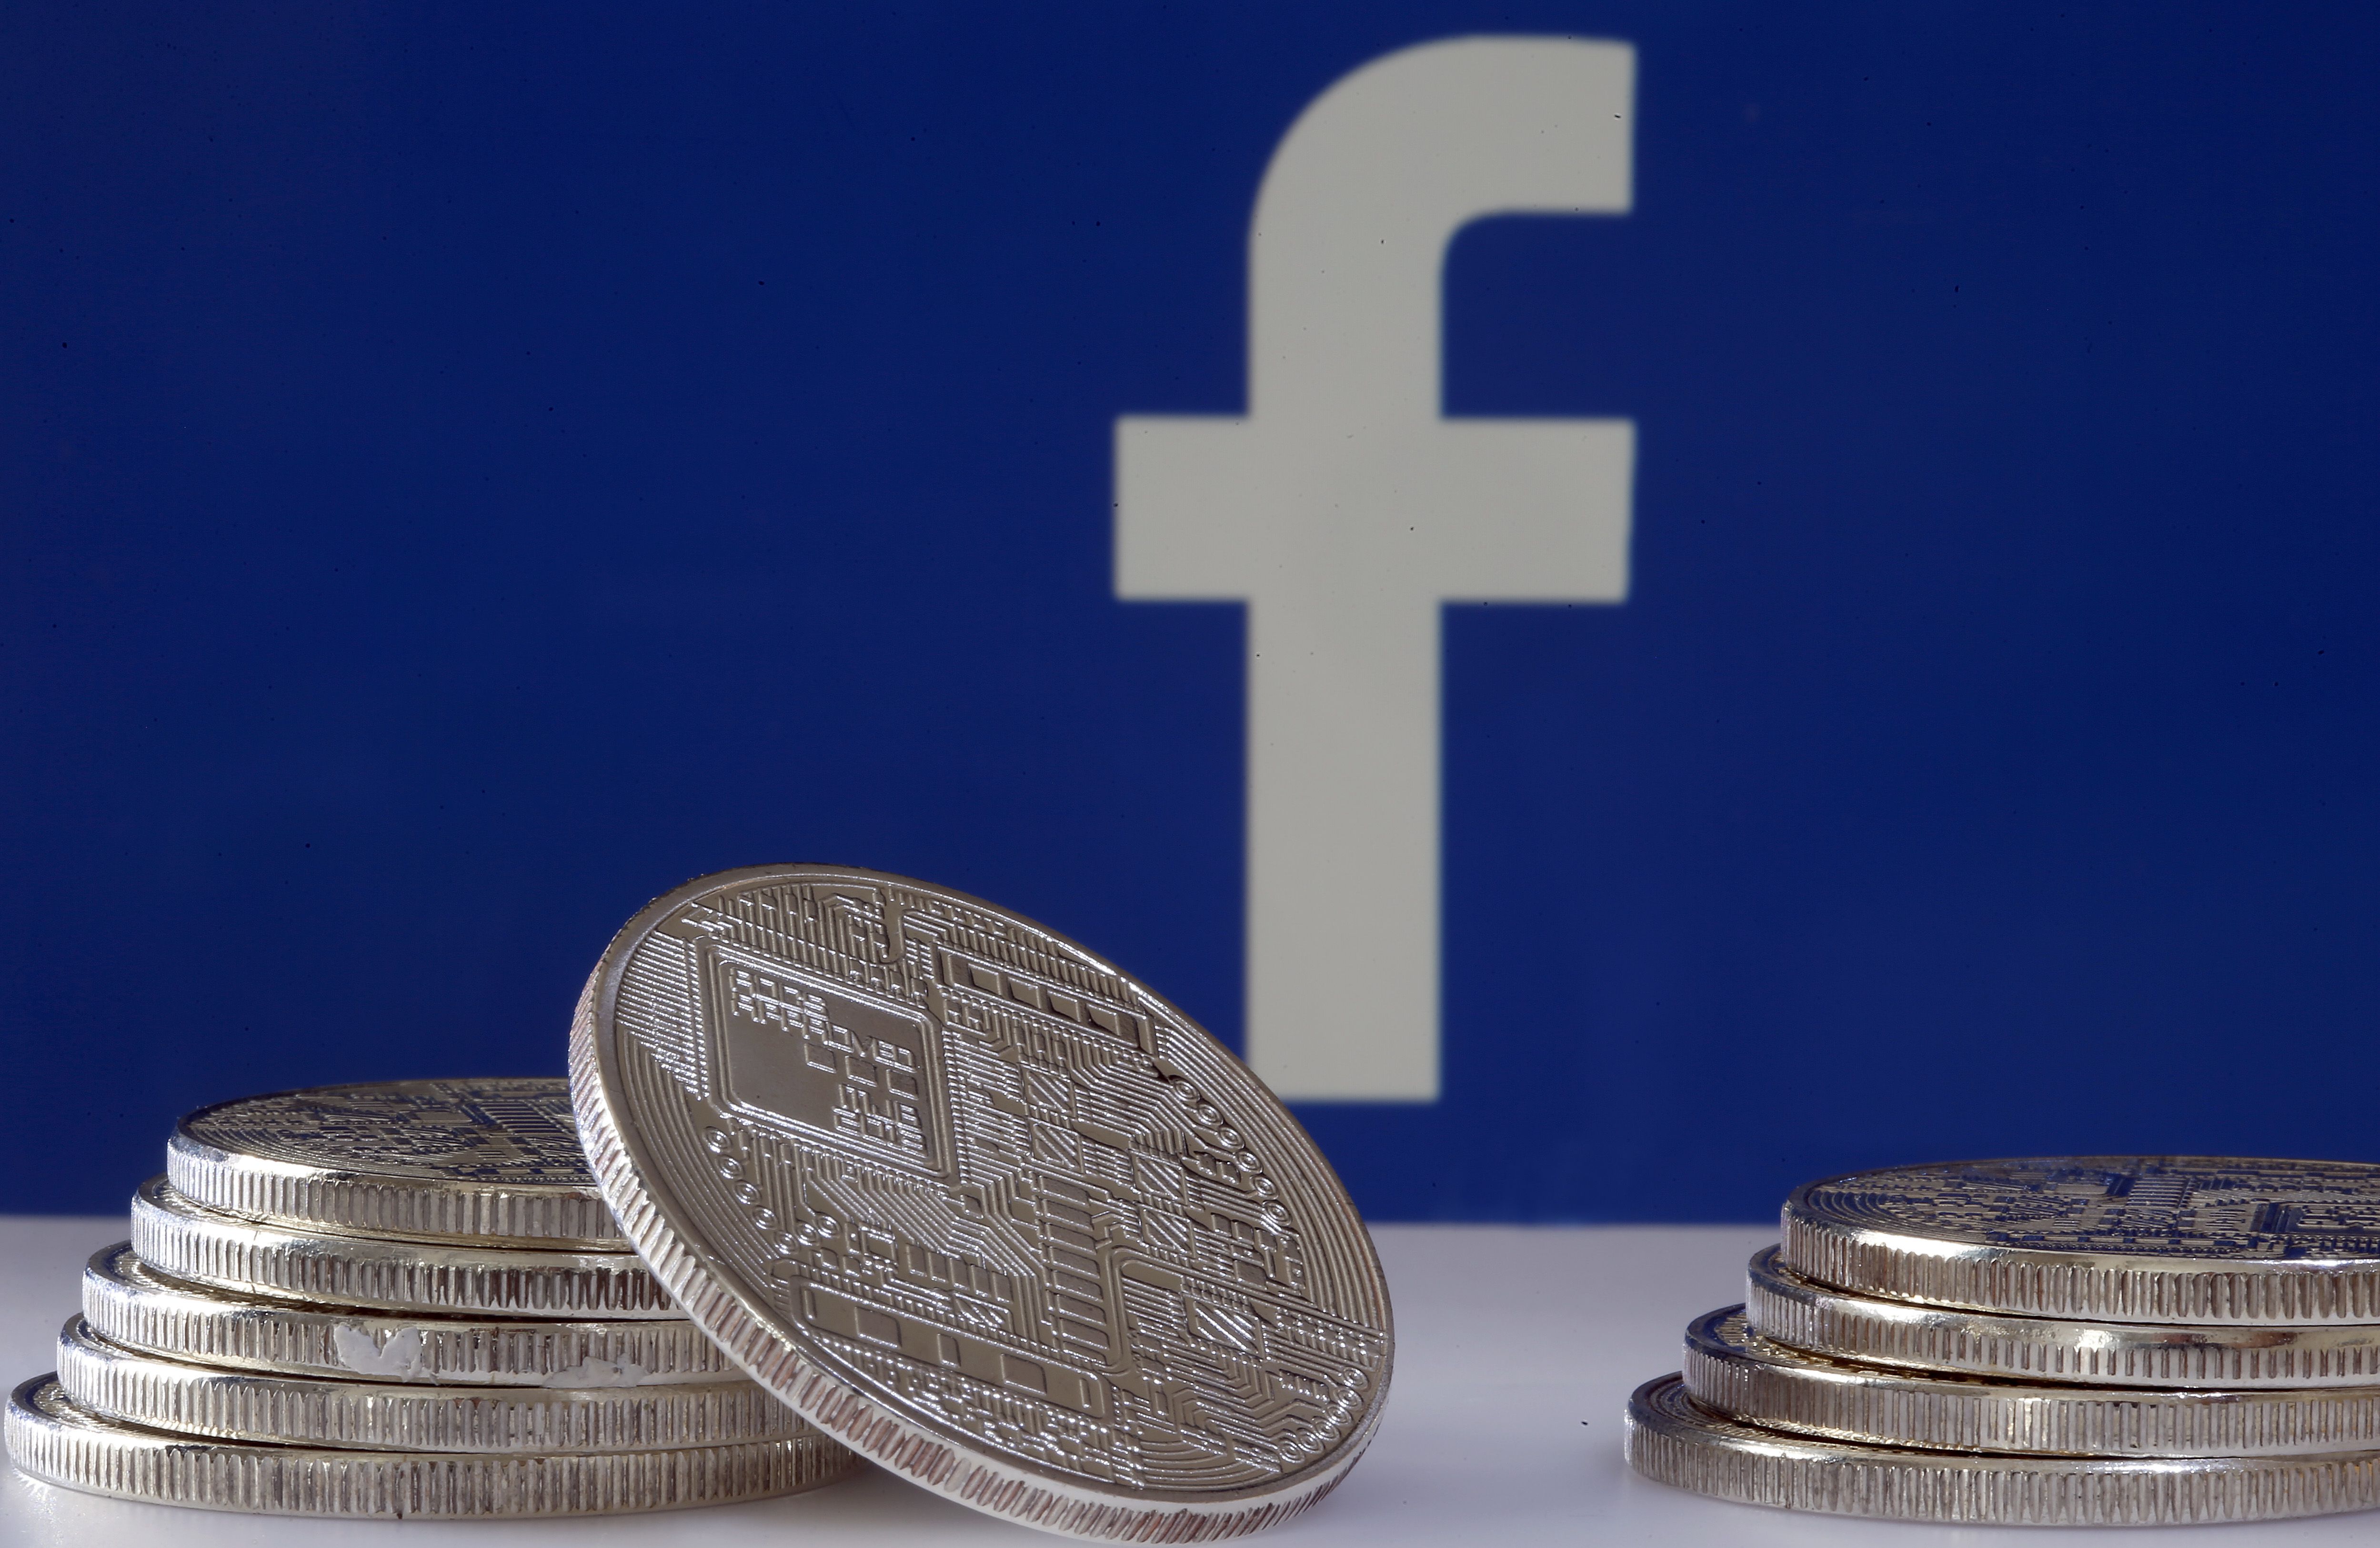 Facebook Libra cryptocurrency faced with central bank warnings